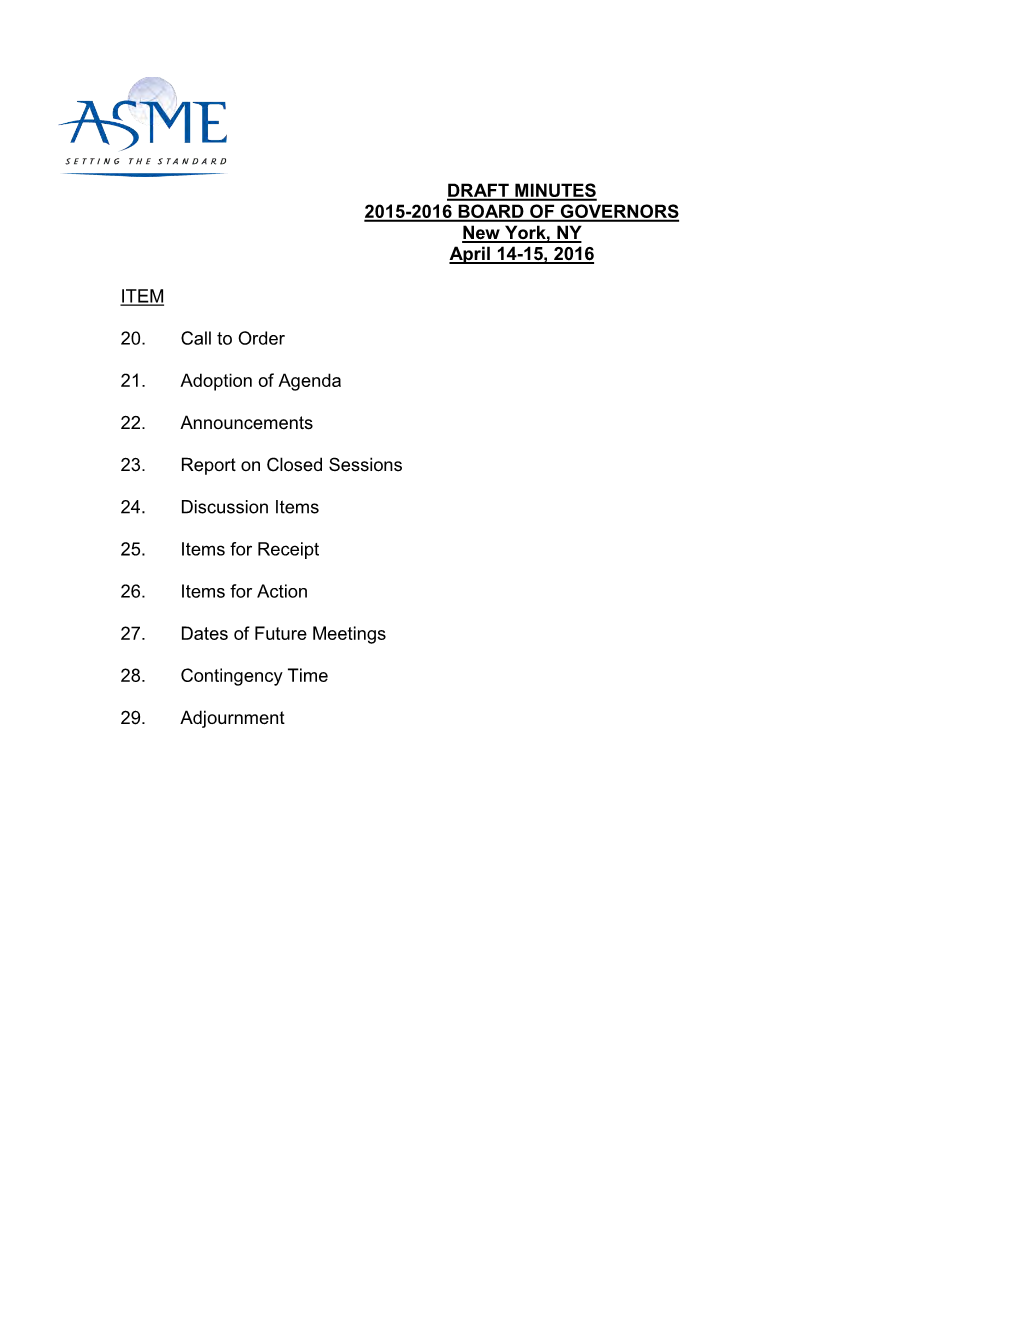 DRAFT MINUTES 2015-2016 BOARD of GOVERNORS New York, NY April 14-15, 2016